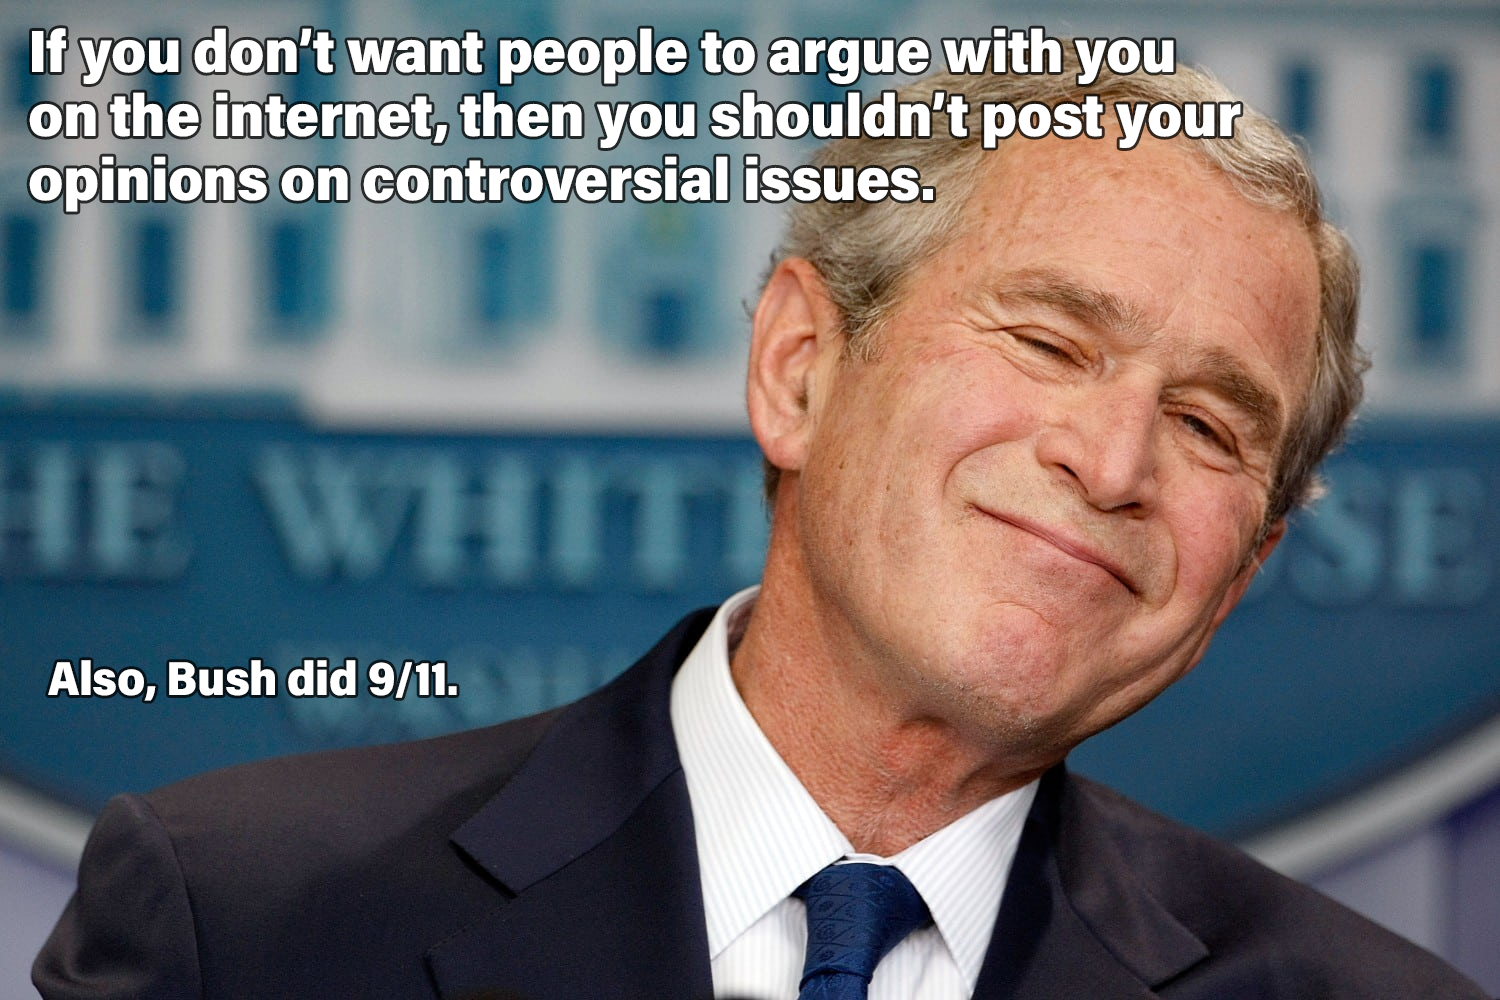 george bush - If you don't want people to argue with you on the internet, then you shouldn't post your opinions on controversial issues. He Whit Also, Bush did 911.